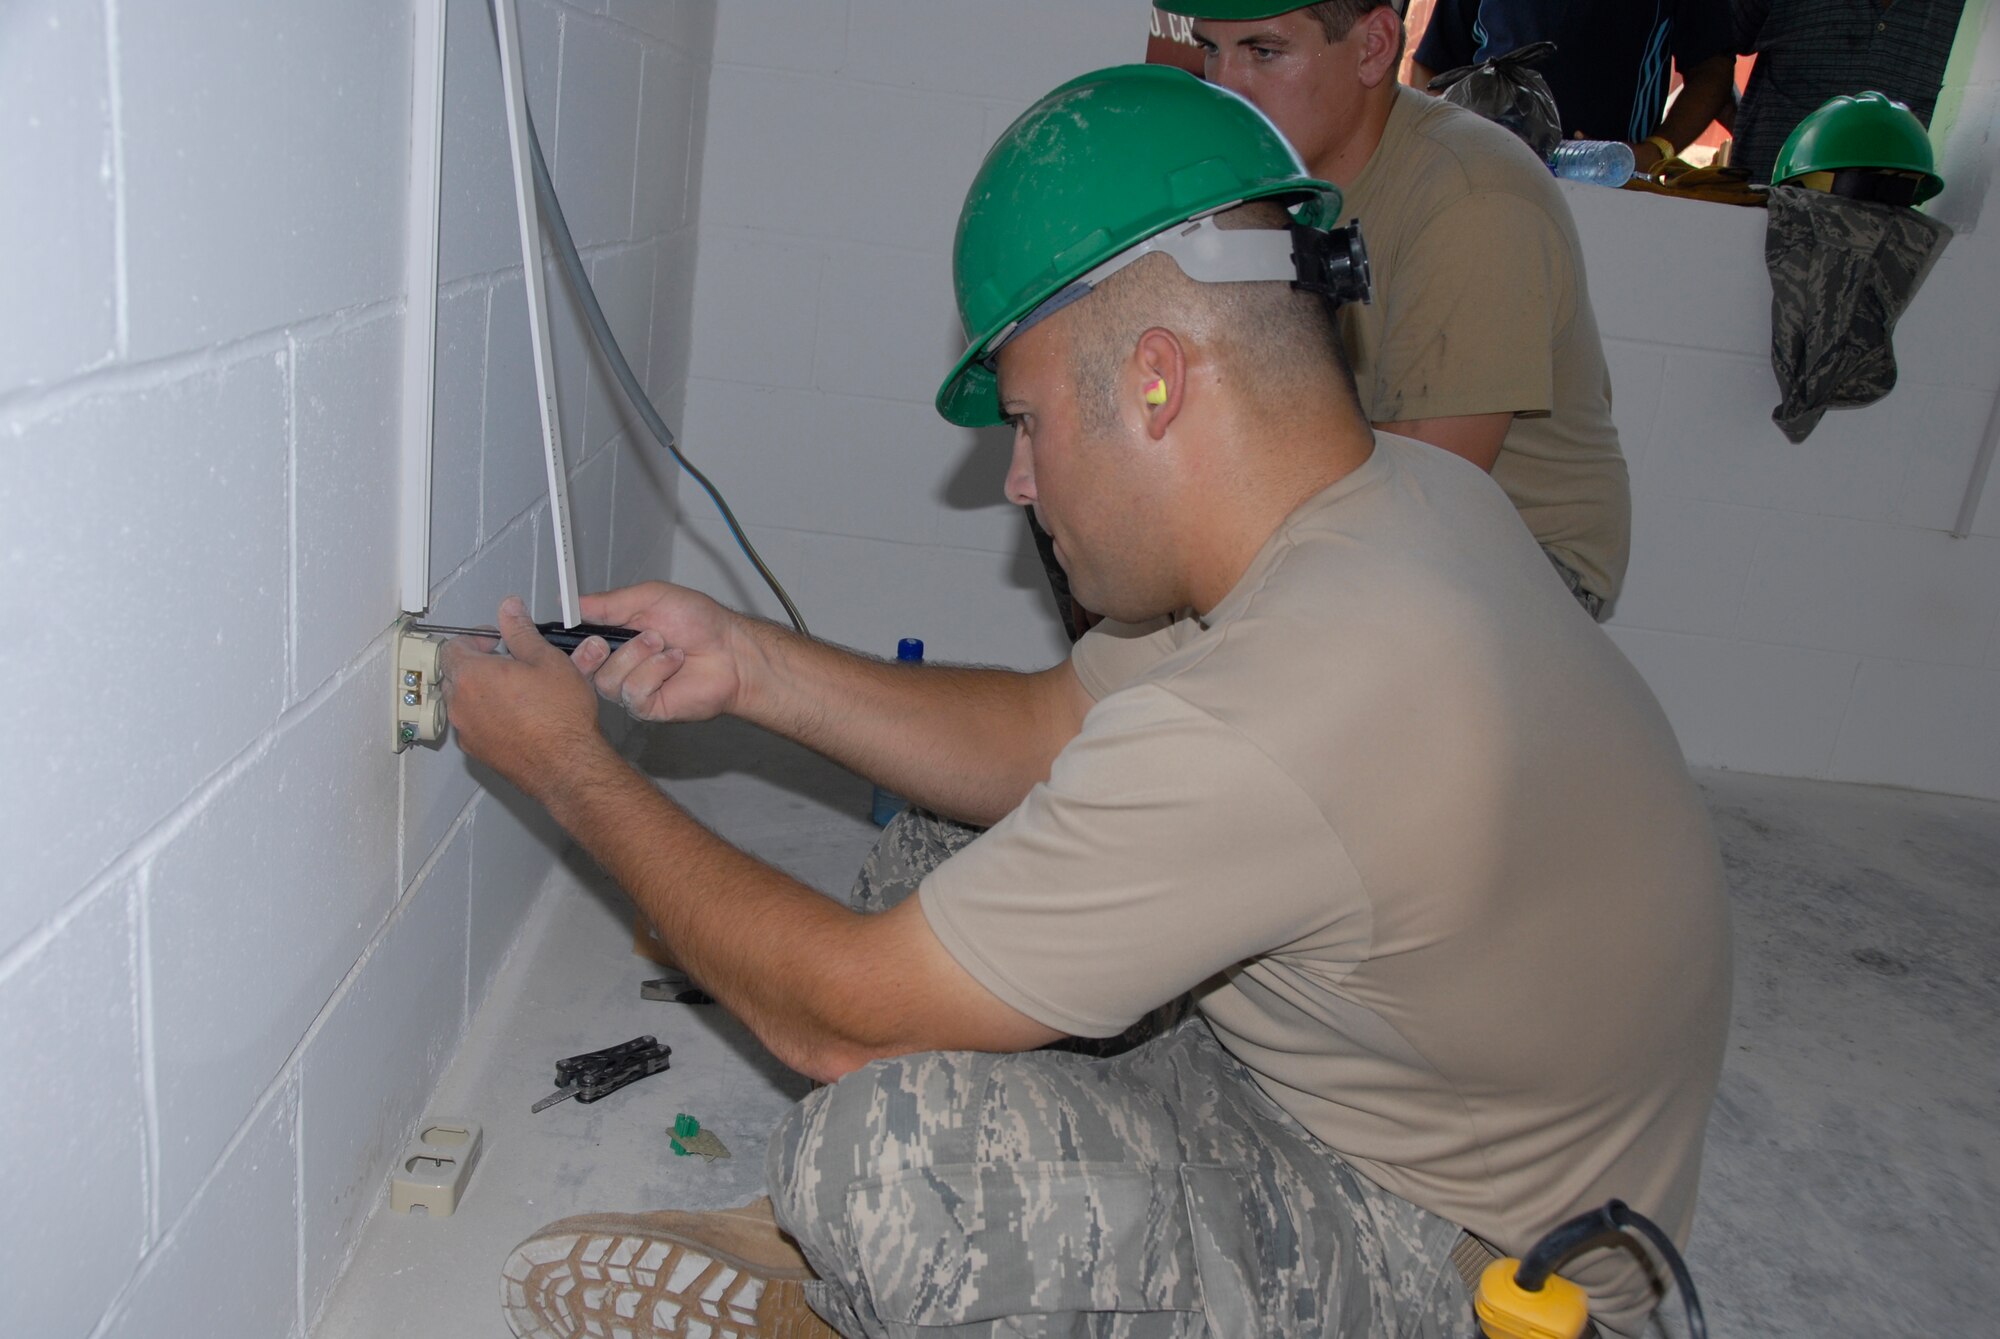 PARAMARIBO, SURINAME - Staff Sgt. Zach Jorgensen, a craftsman with the 114th Fighter Wing's Civil Engineer Squadron,  shows Senior Airman Andrew Peterson how to install an electrical outlet in the Alkmaar Clinc being built in the Commewijne district here July 13, 2011.  The 114th is helping build one of  two clinics that are scheduled to be built during New Horizons Suriname.  (Air Force Photo by Tech. Sgt. Quinton Young)(RELEASED) USAF